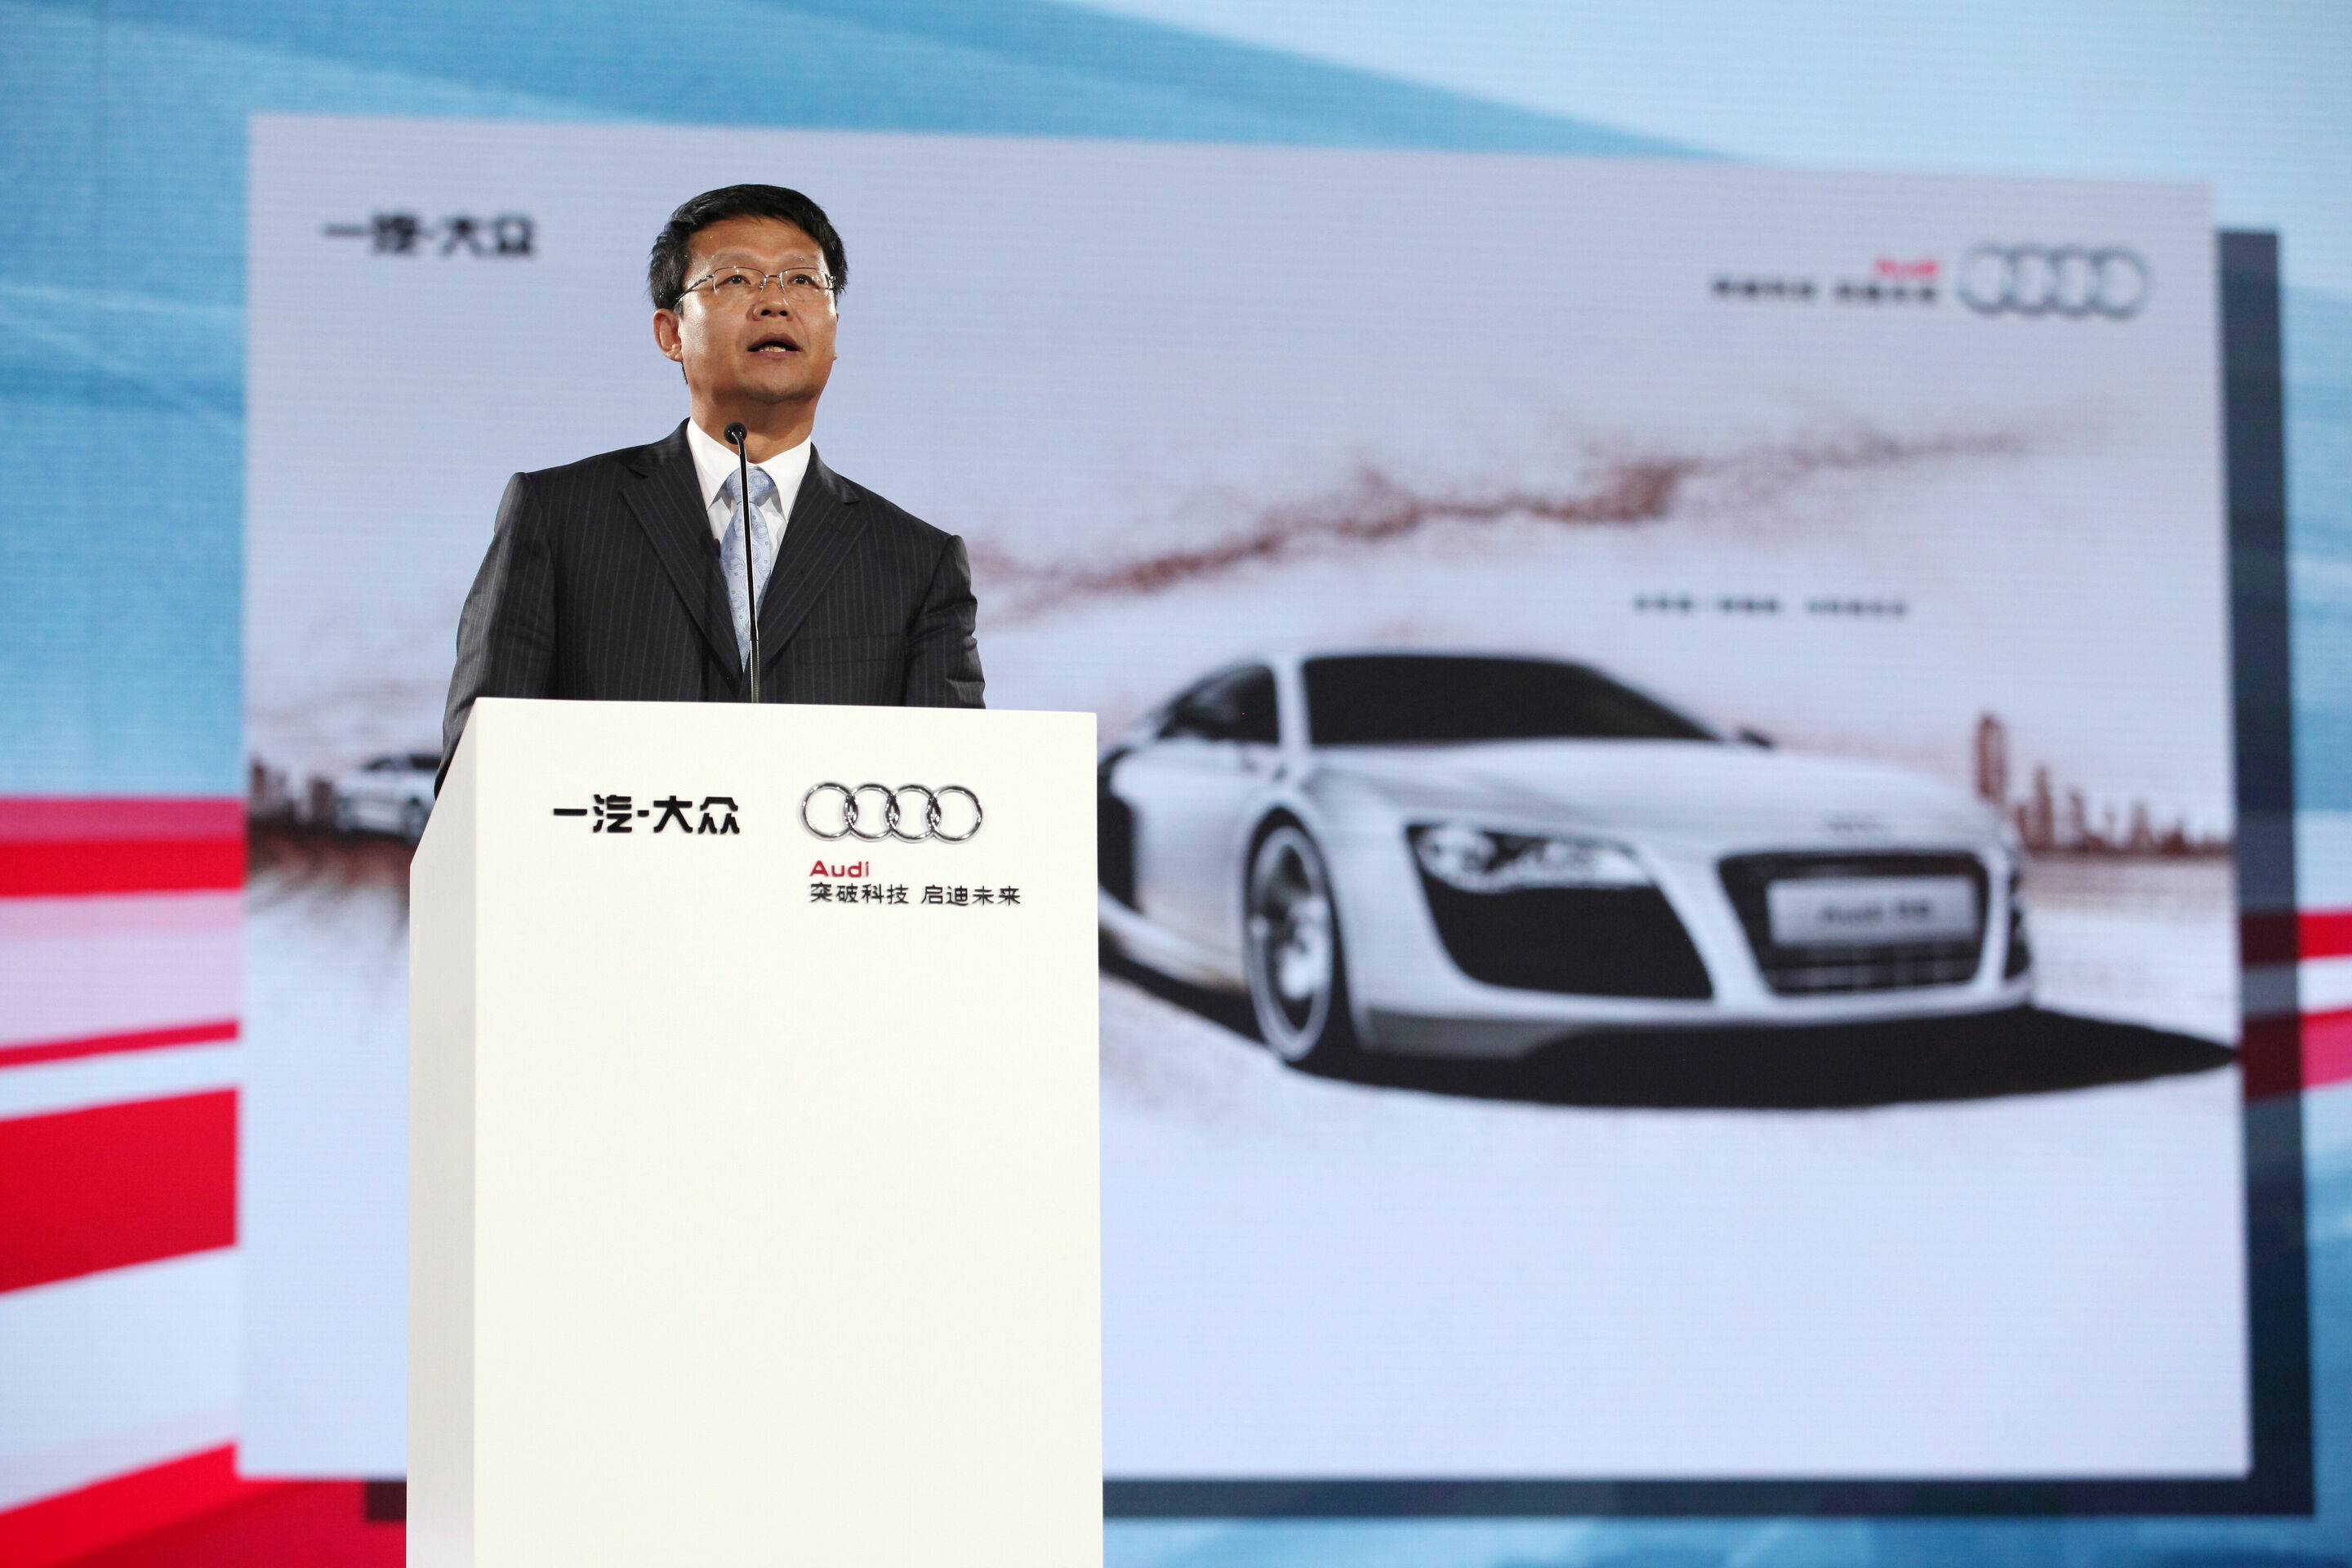 Audi celebrates the 25th jubilee of its partnership with First Automotive Works (FAW). At the same time, Audi is today delivering to a customer its two-millionth car in China, a locally produced Audi A6 L. The two companies have announced that they will work together on a plug-in-hybrid project.